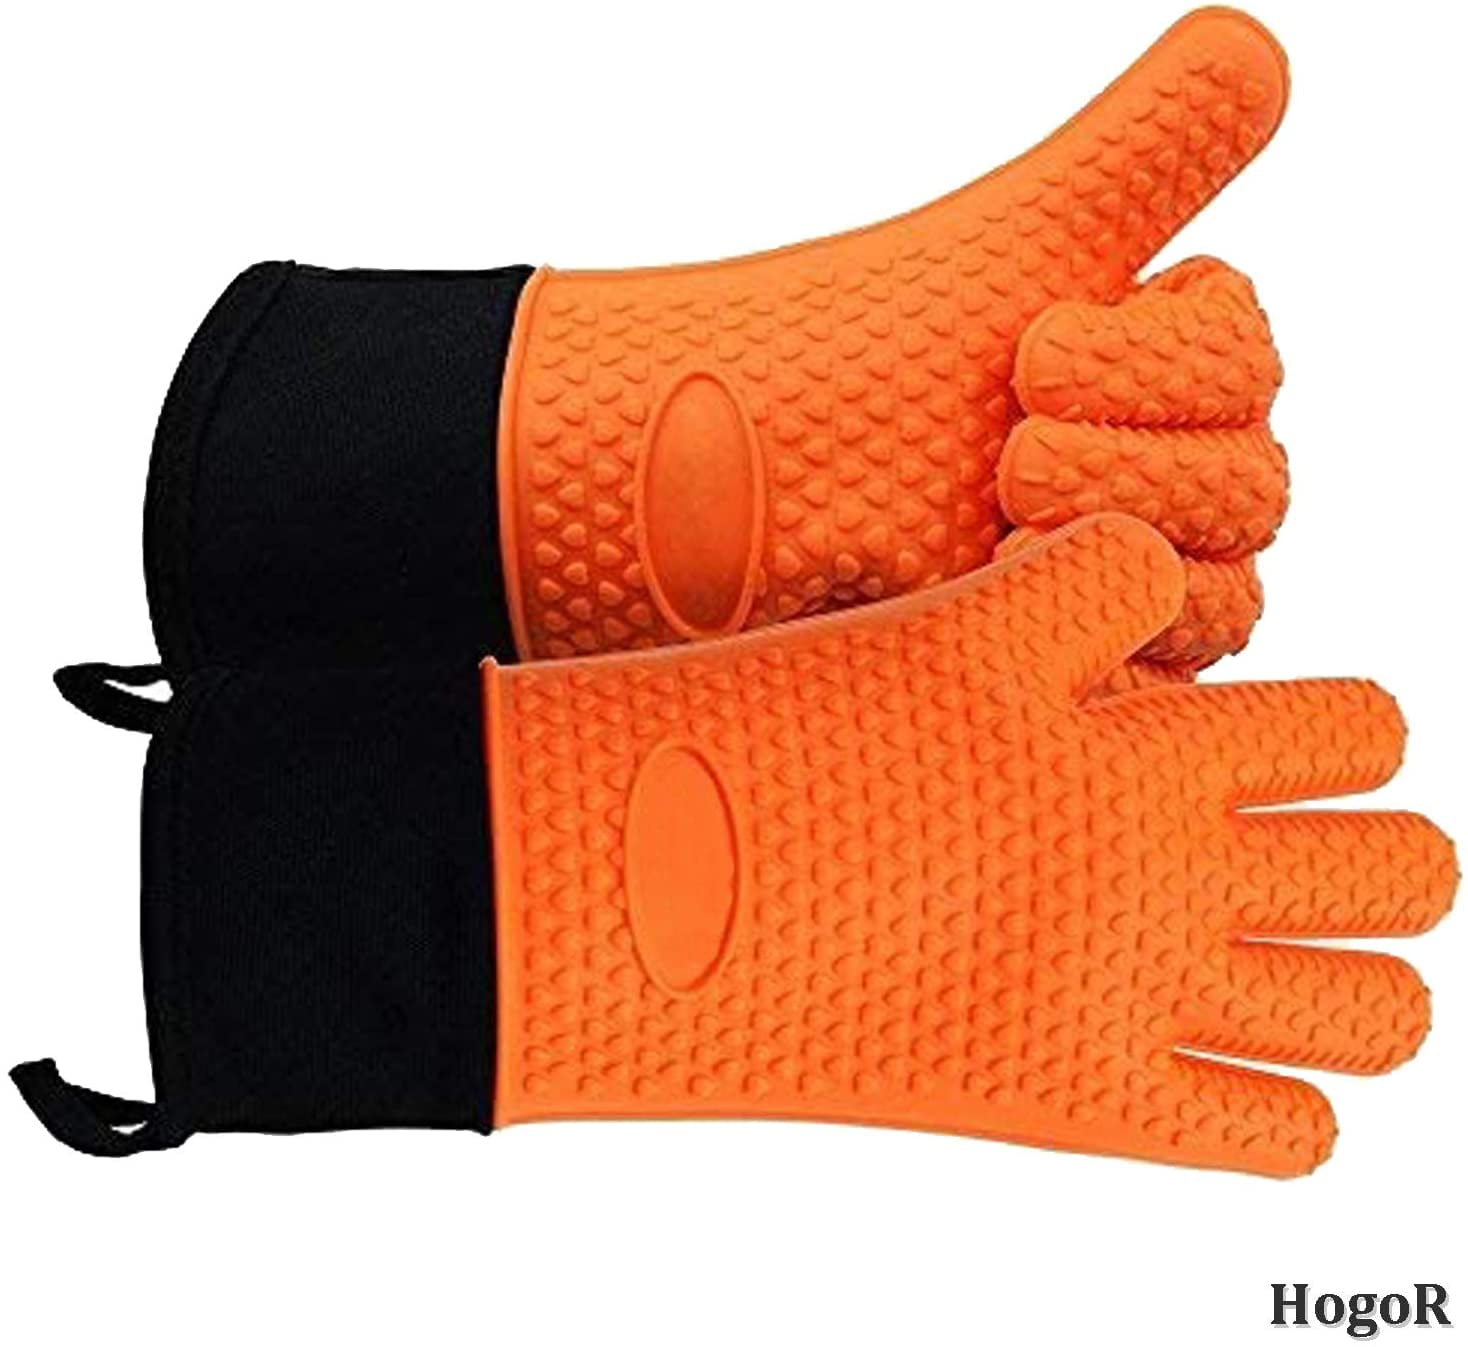 Homeerr P1638067 BBQ Gloves Heat Resistant Gloves BBQ Tools Holiday Present for Mum Dad Outdoor Cooking Gloves-14 inch Long for Forearm 1 Pair 